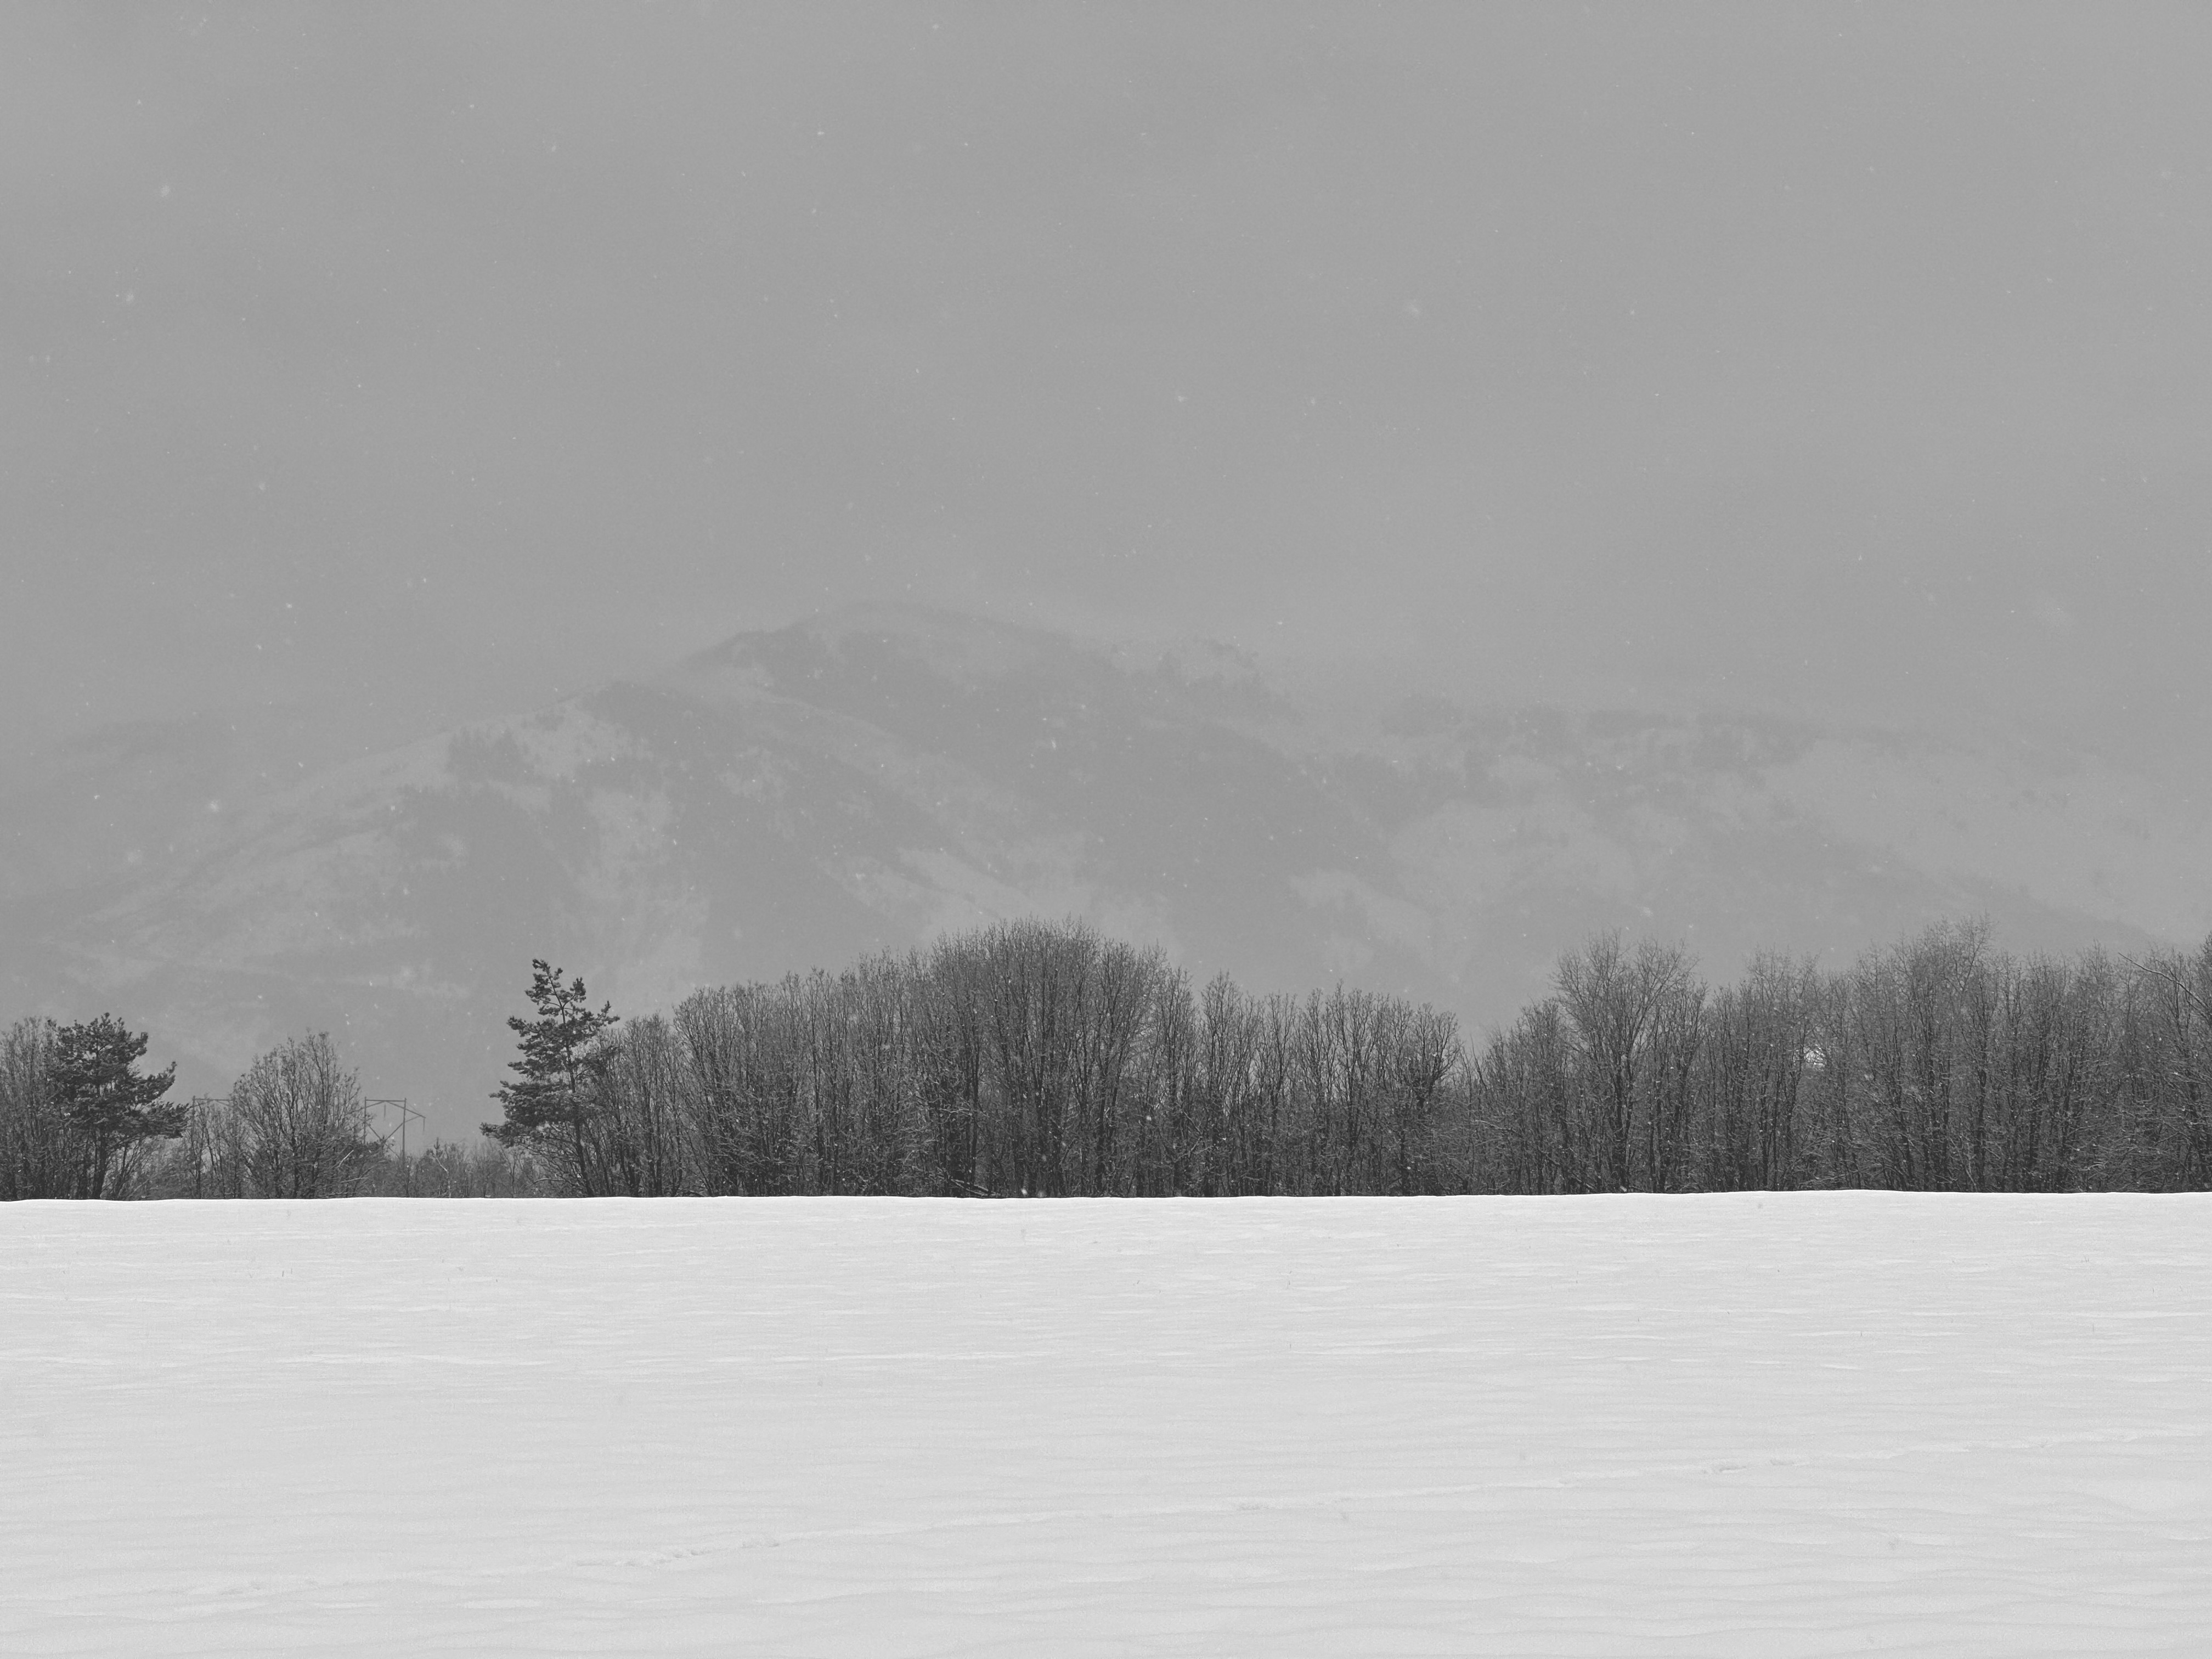 A snow covered field recedes to a faraway line of bare trees. Behind the trees, just barely visible within a low curtain of mist, is a low ridgeline.